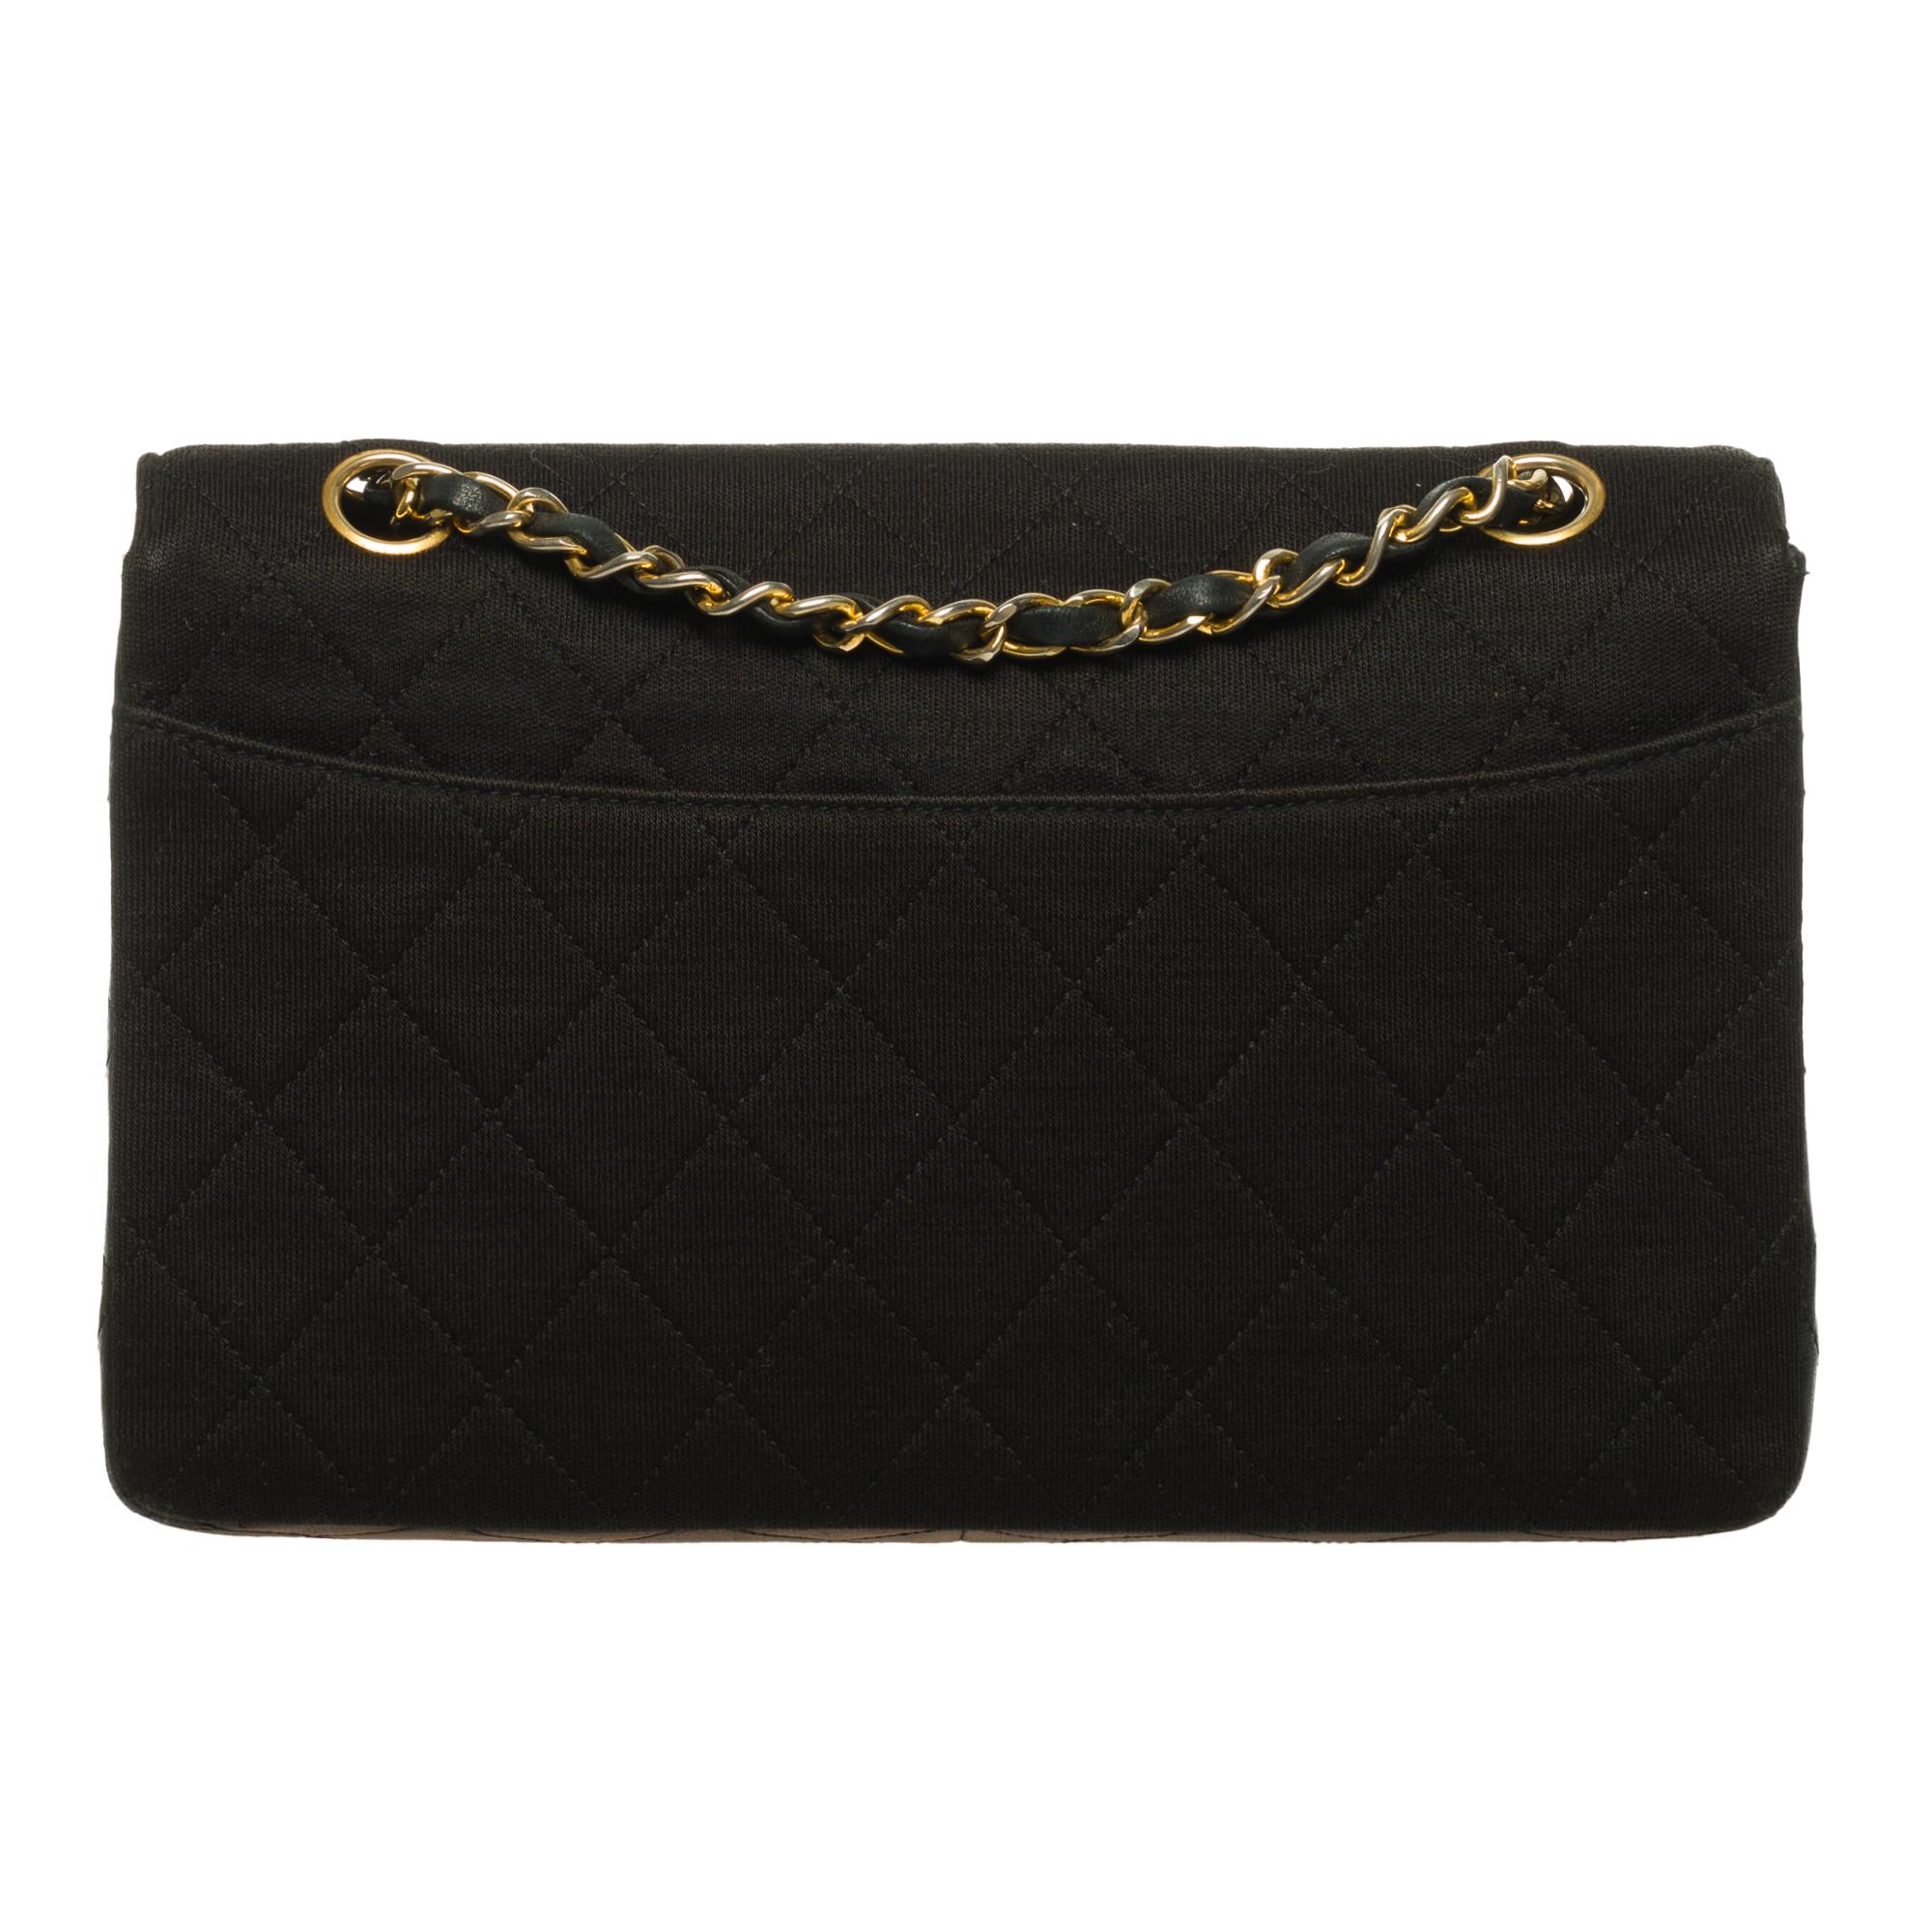 Lovely Chanel Crossbody bag, single Flap Bi-Material Vintage with wallet.

* Quilted leather and black jersey, gold-tone metal trim
* With his black leather wallet.
* With its authenticity card
* Hologram present but not visible
* Gold-tone metal